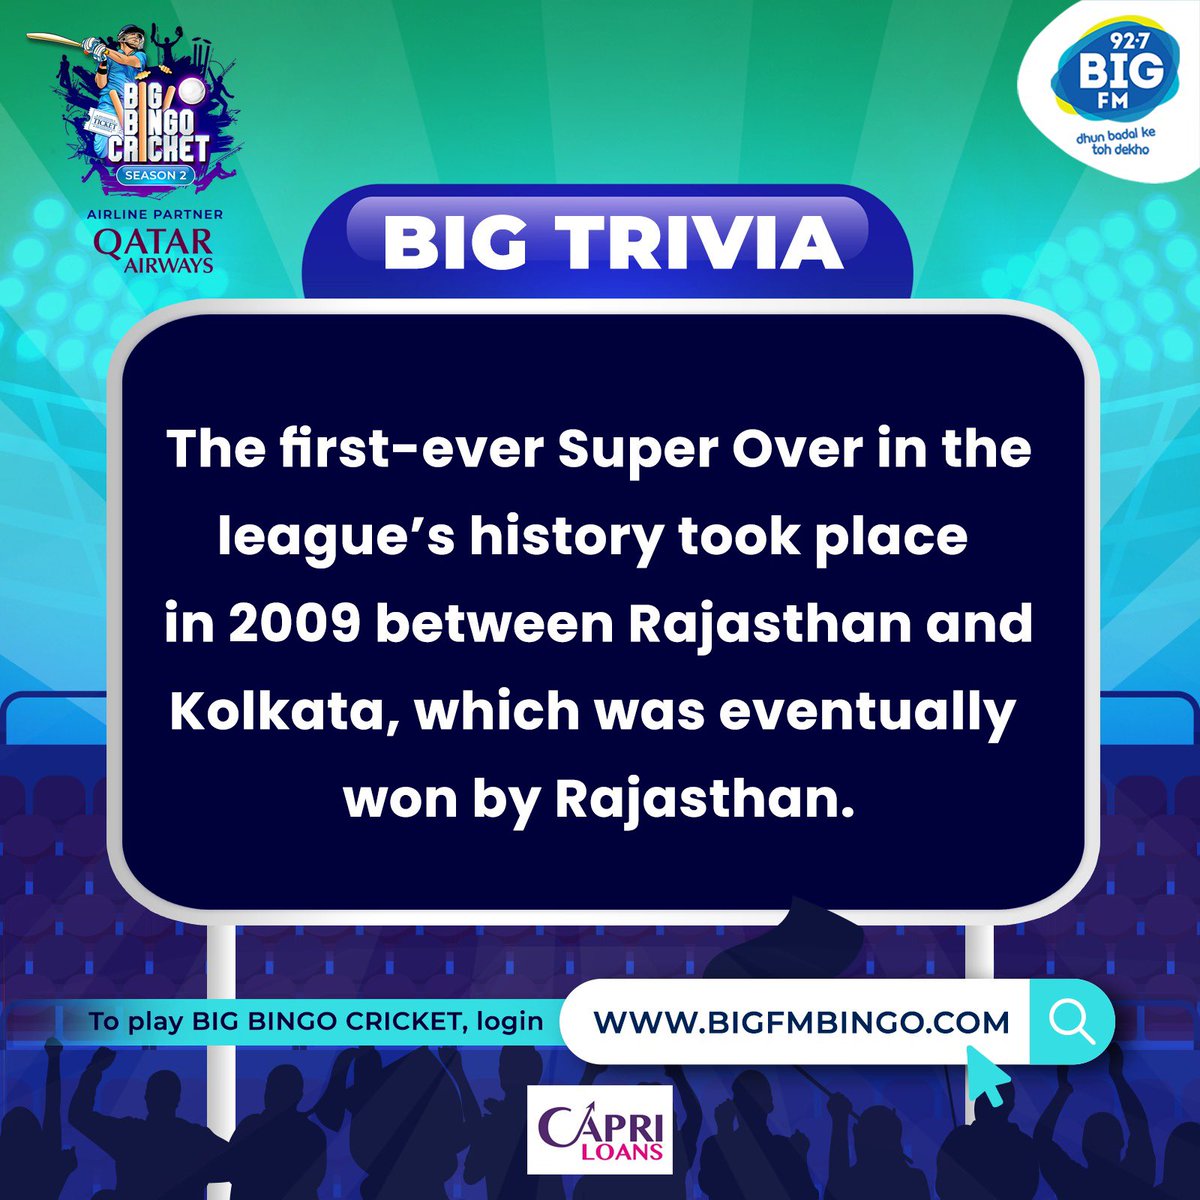 Its time for some weekend BIG Trivia ✨ This time its Double the Cricket, Double the Thrill with BIG BINGO Cricket Season 2 and @IrfanPathan 💙 Register and login on bigfmbingo.com to start playing 🏏 Airline Partner: @qatarairways #BIGFM #DhunBadalKeTohDekho